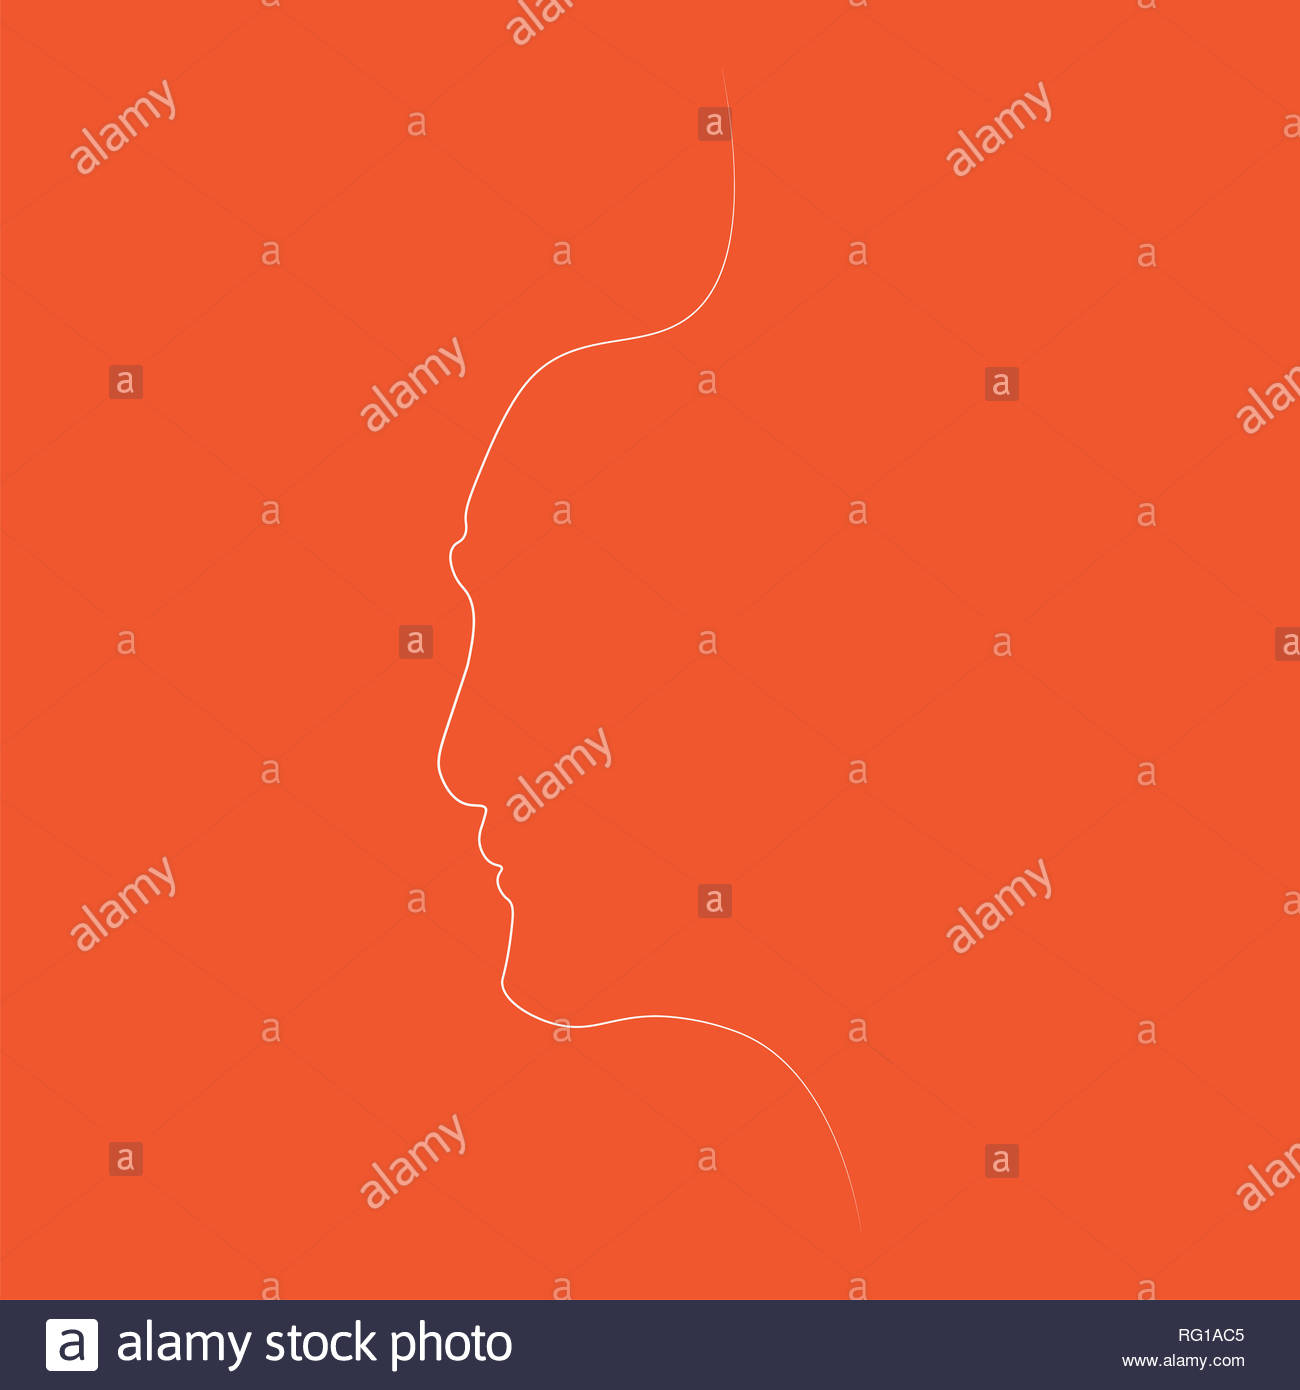 Man of one line illustration on color background Stock Photo